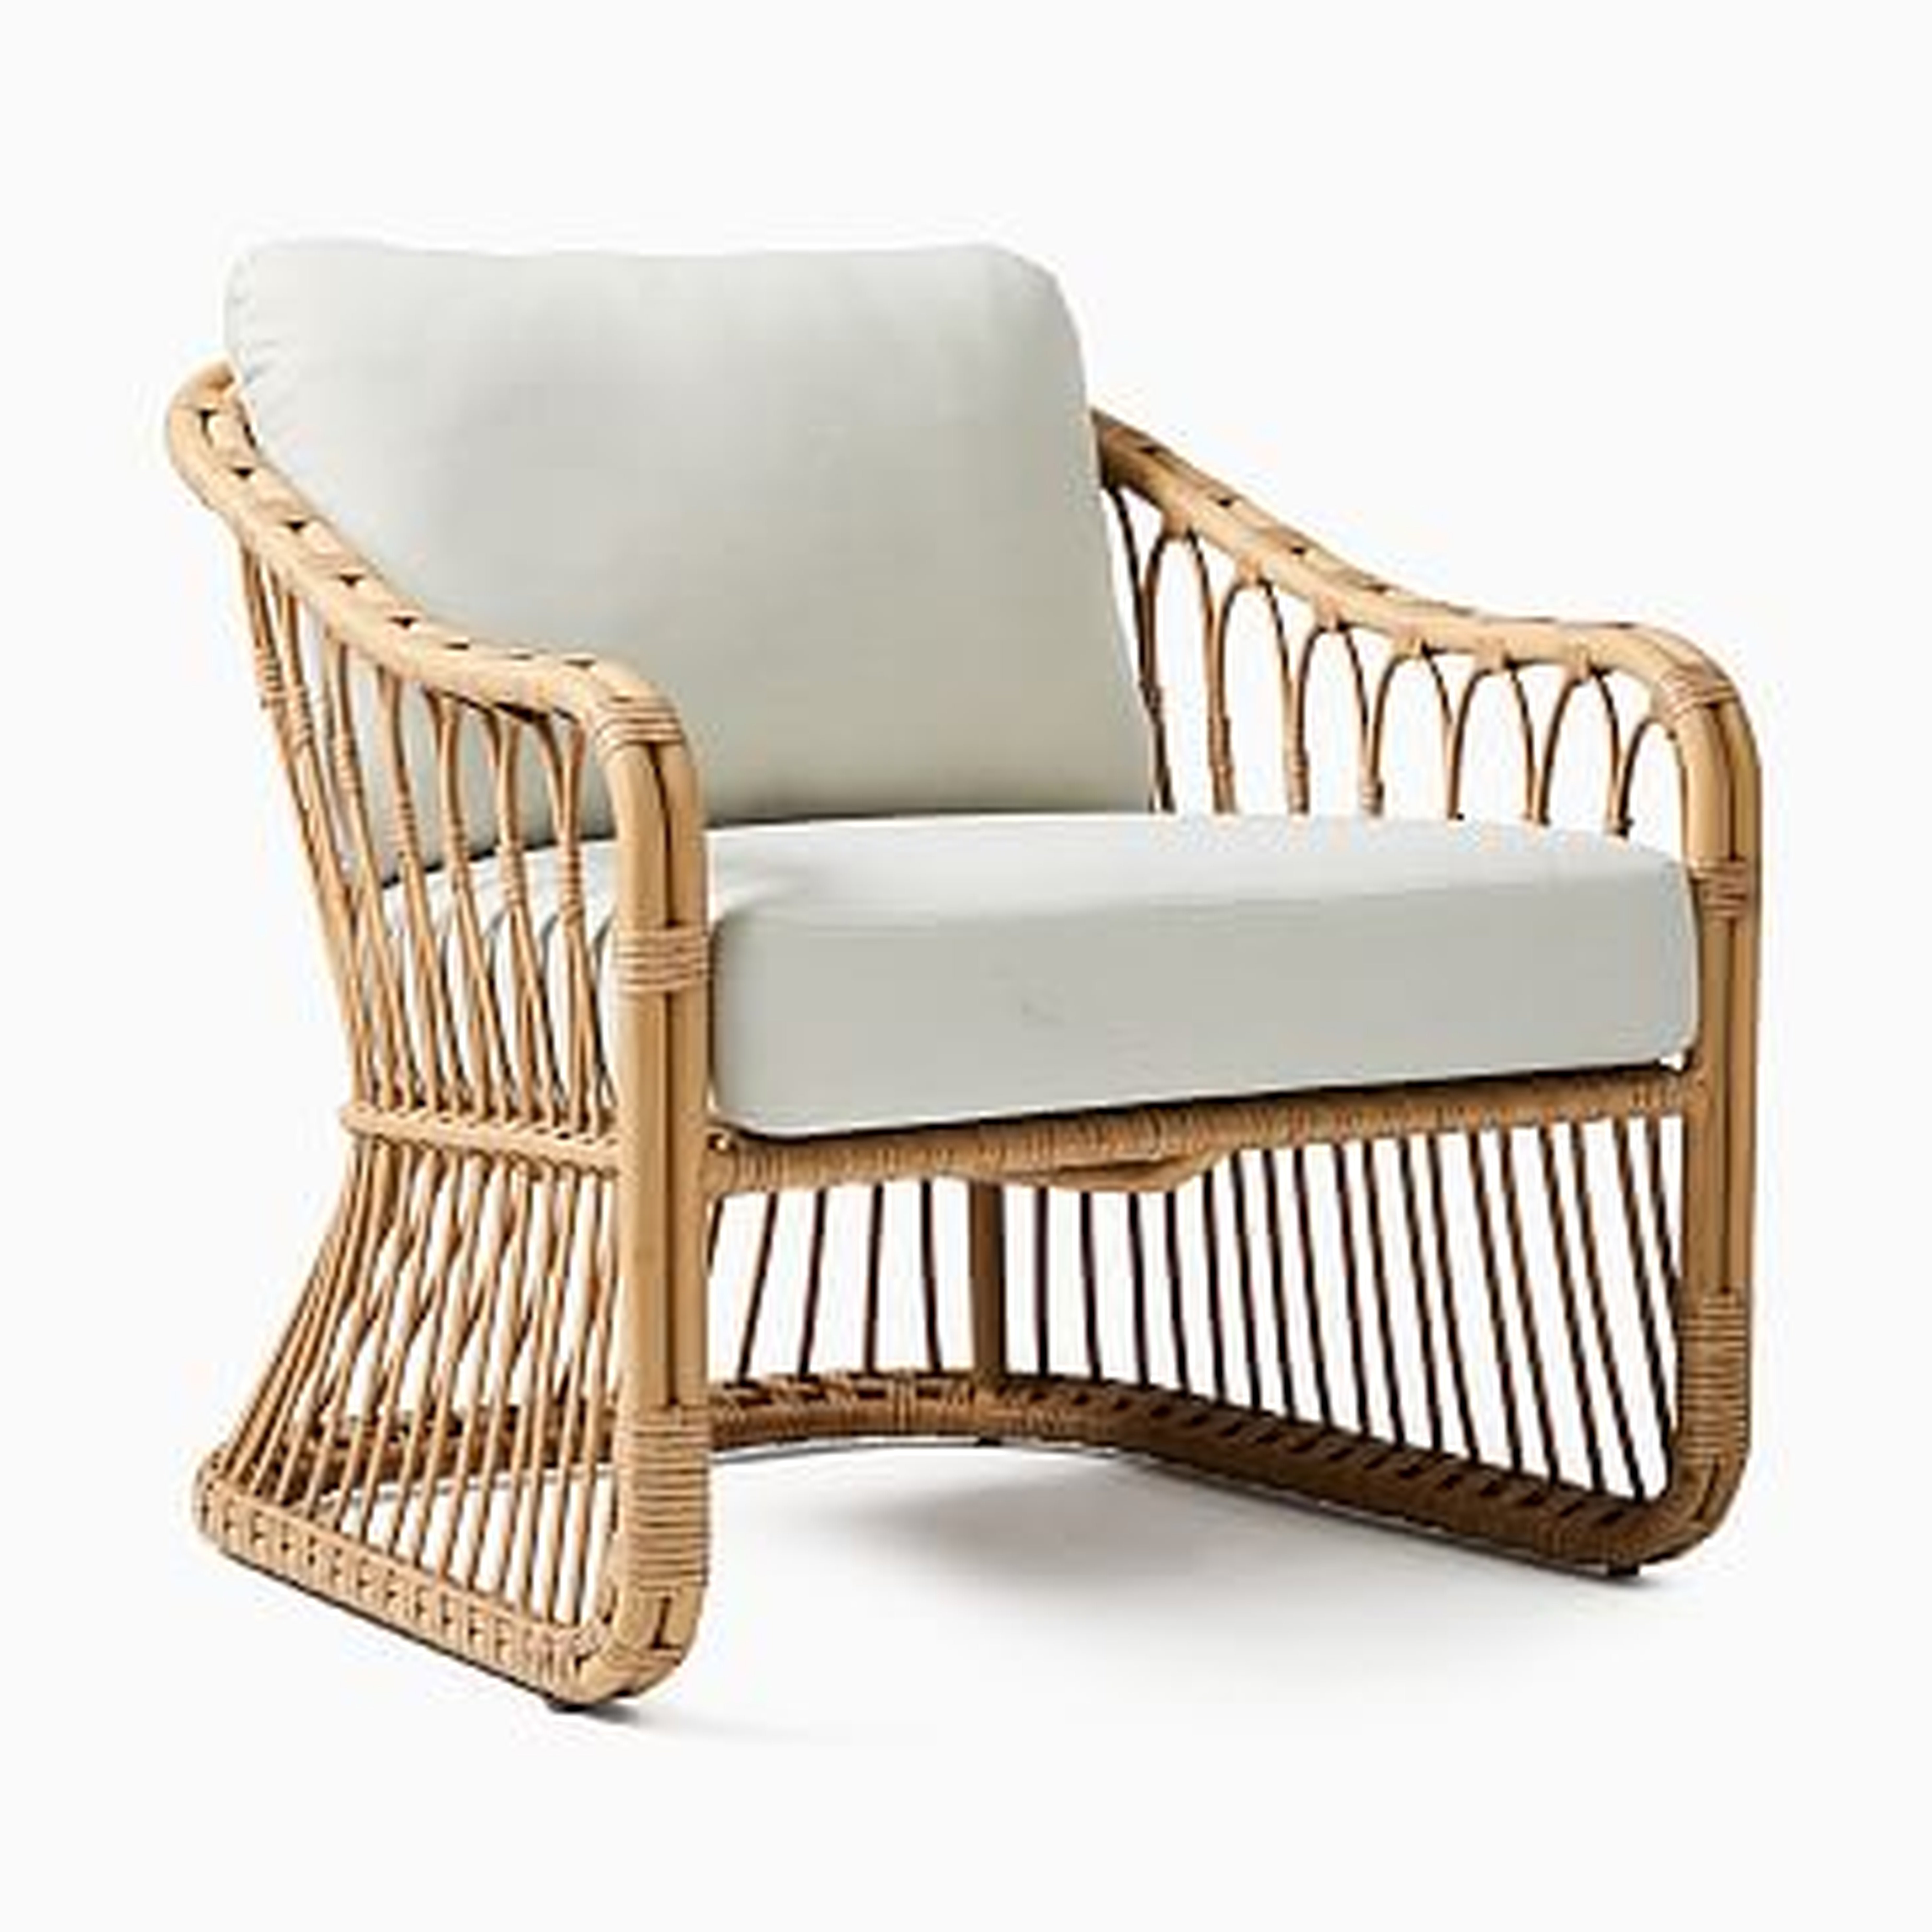 Tulum Lounge Chair, S/2, Natural Rattan - West Elm